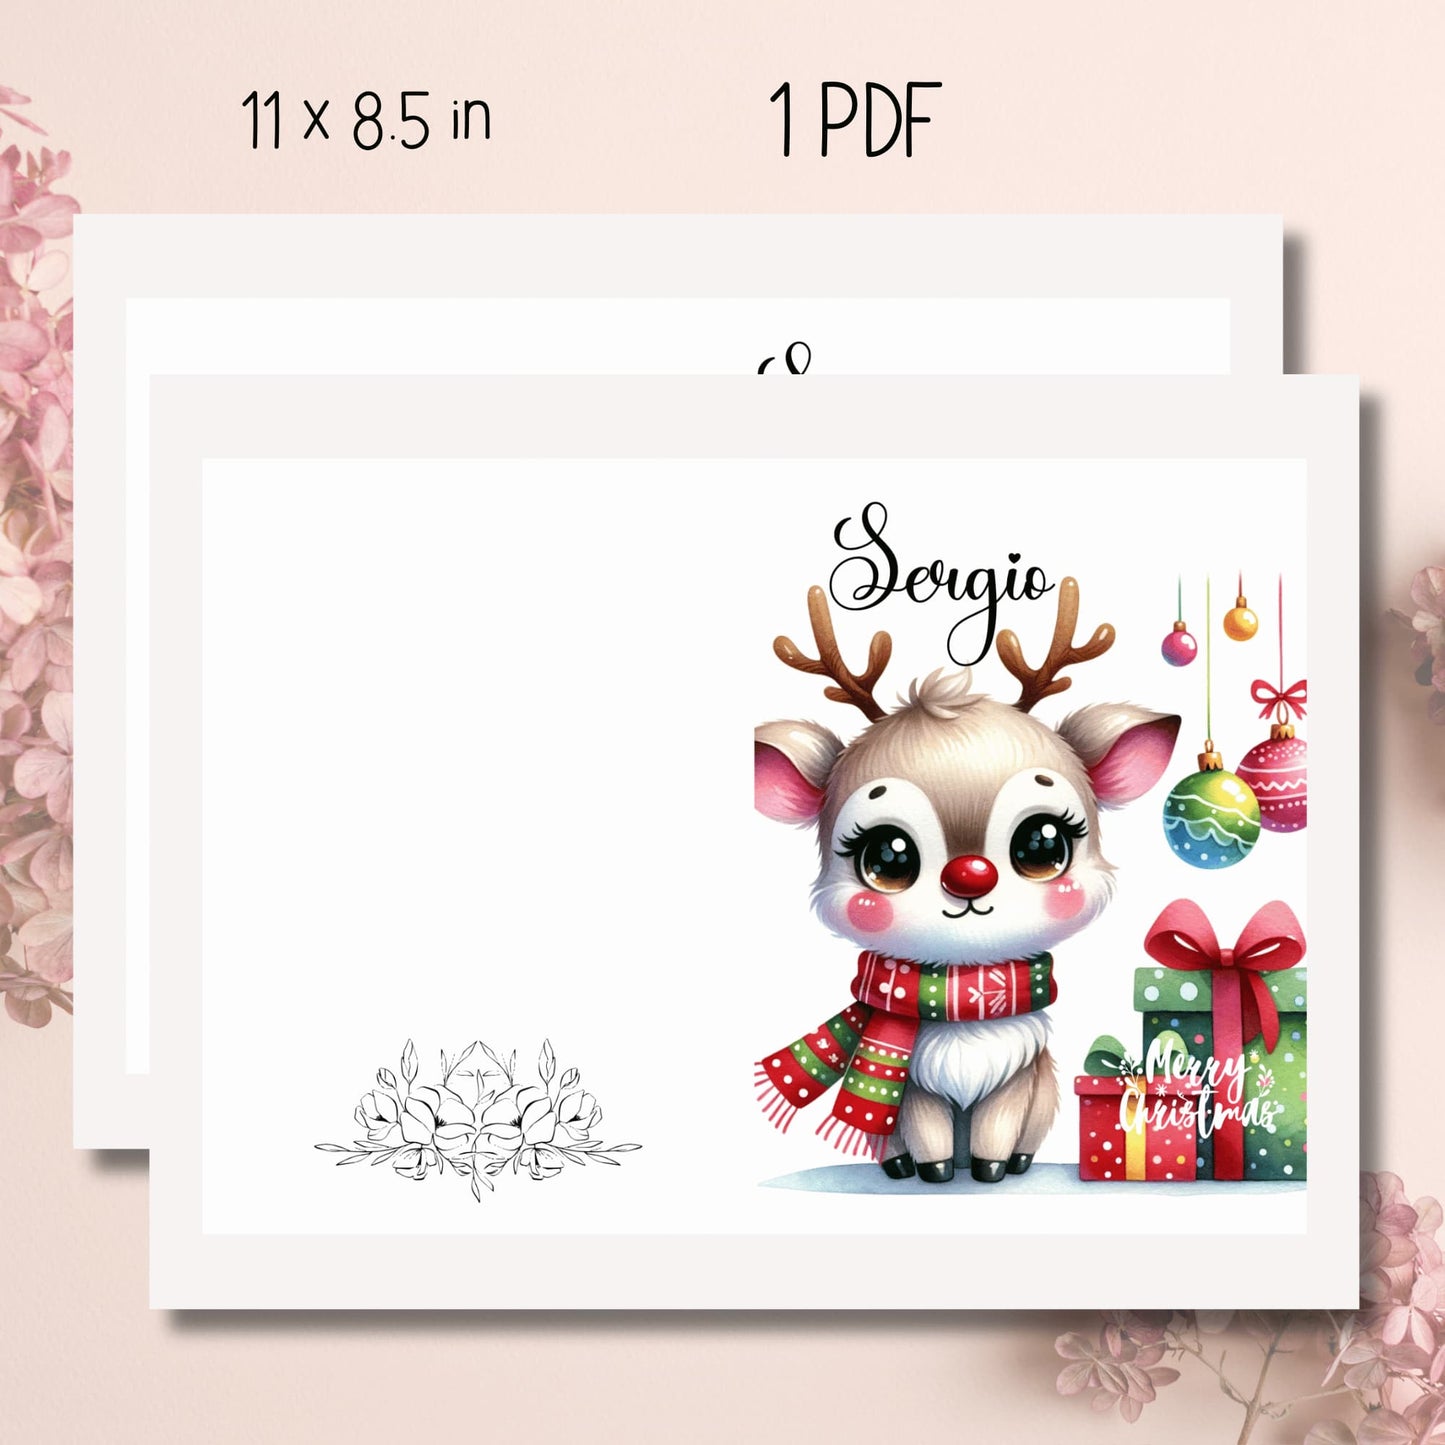 1x8.5 inch Christmas Greeting Card print-ready sheet showcasing easy-to-print, high-quality templates for the 2023 holiday season, ready for personalization and festive greetings.